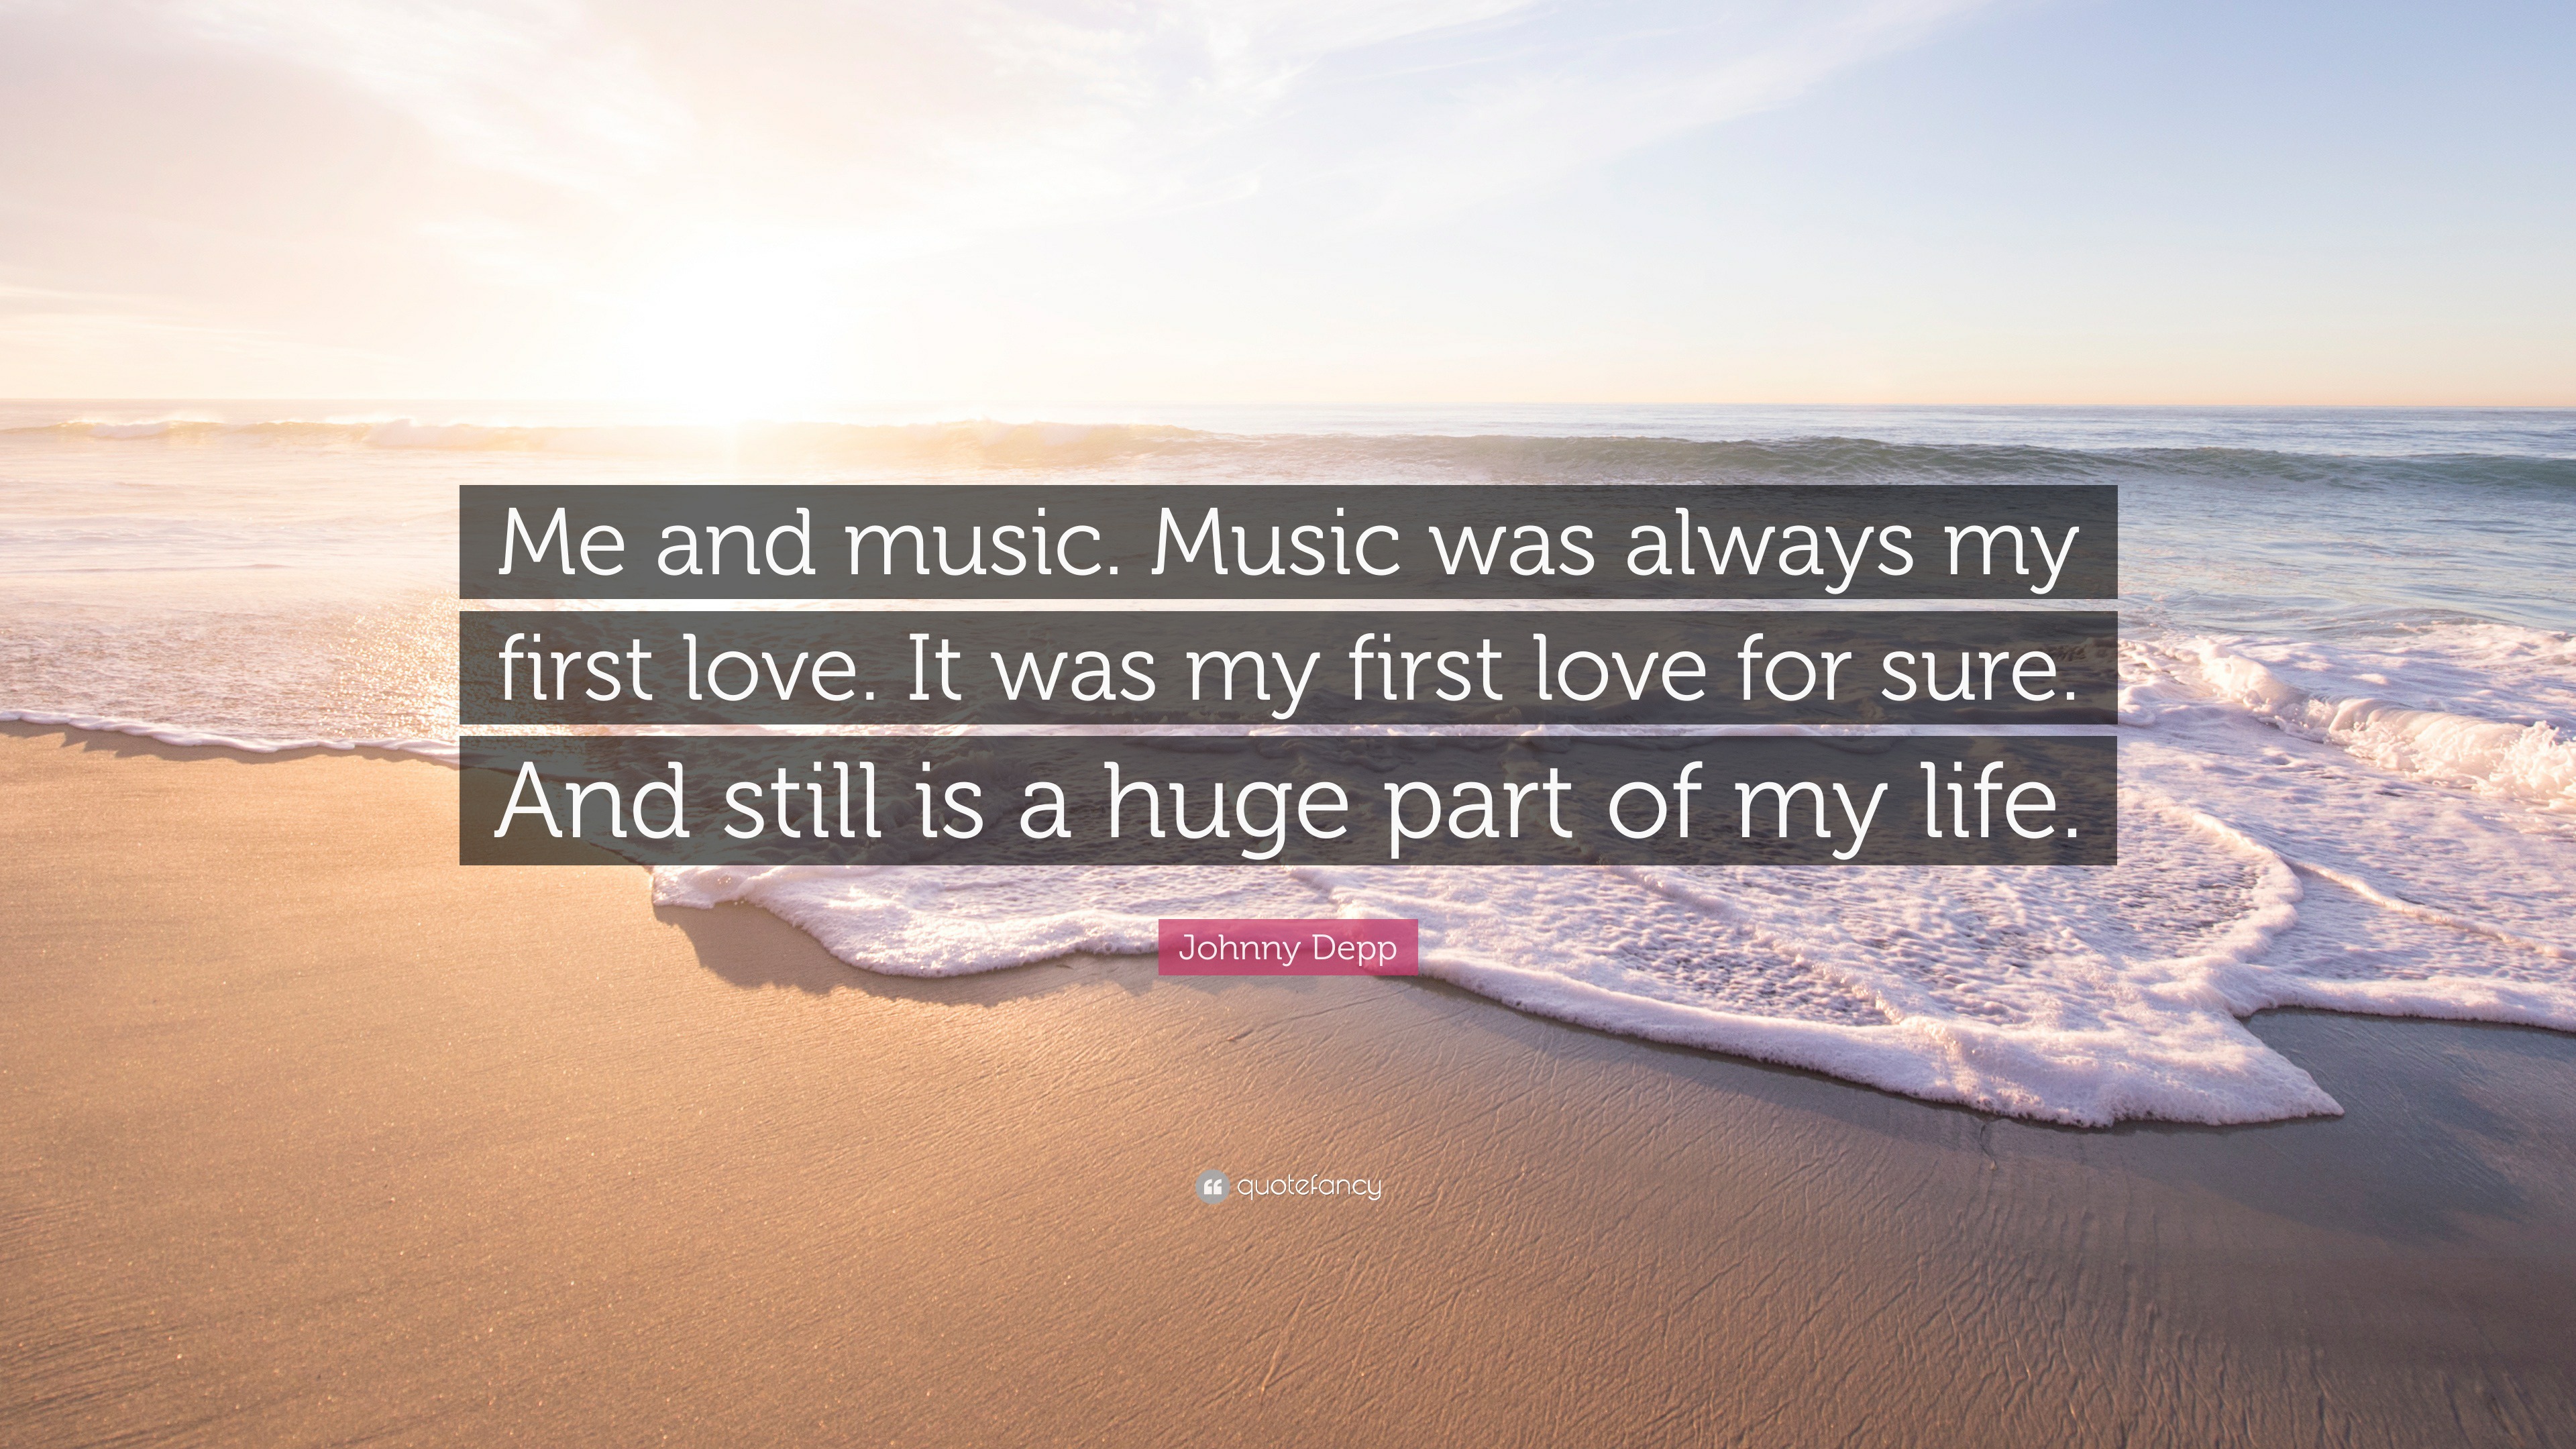 music was my first love